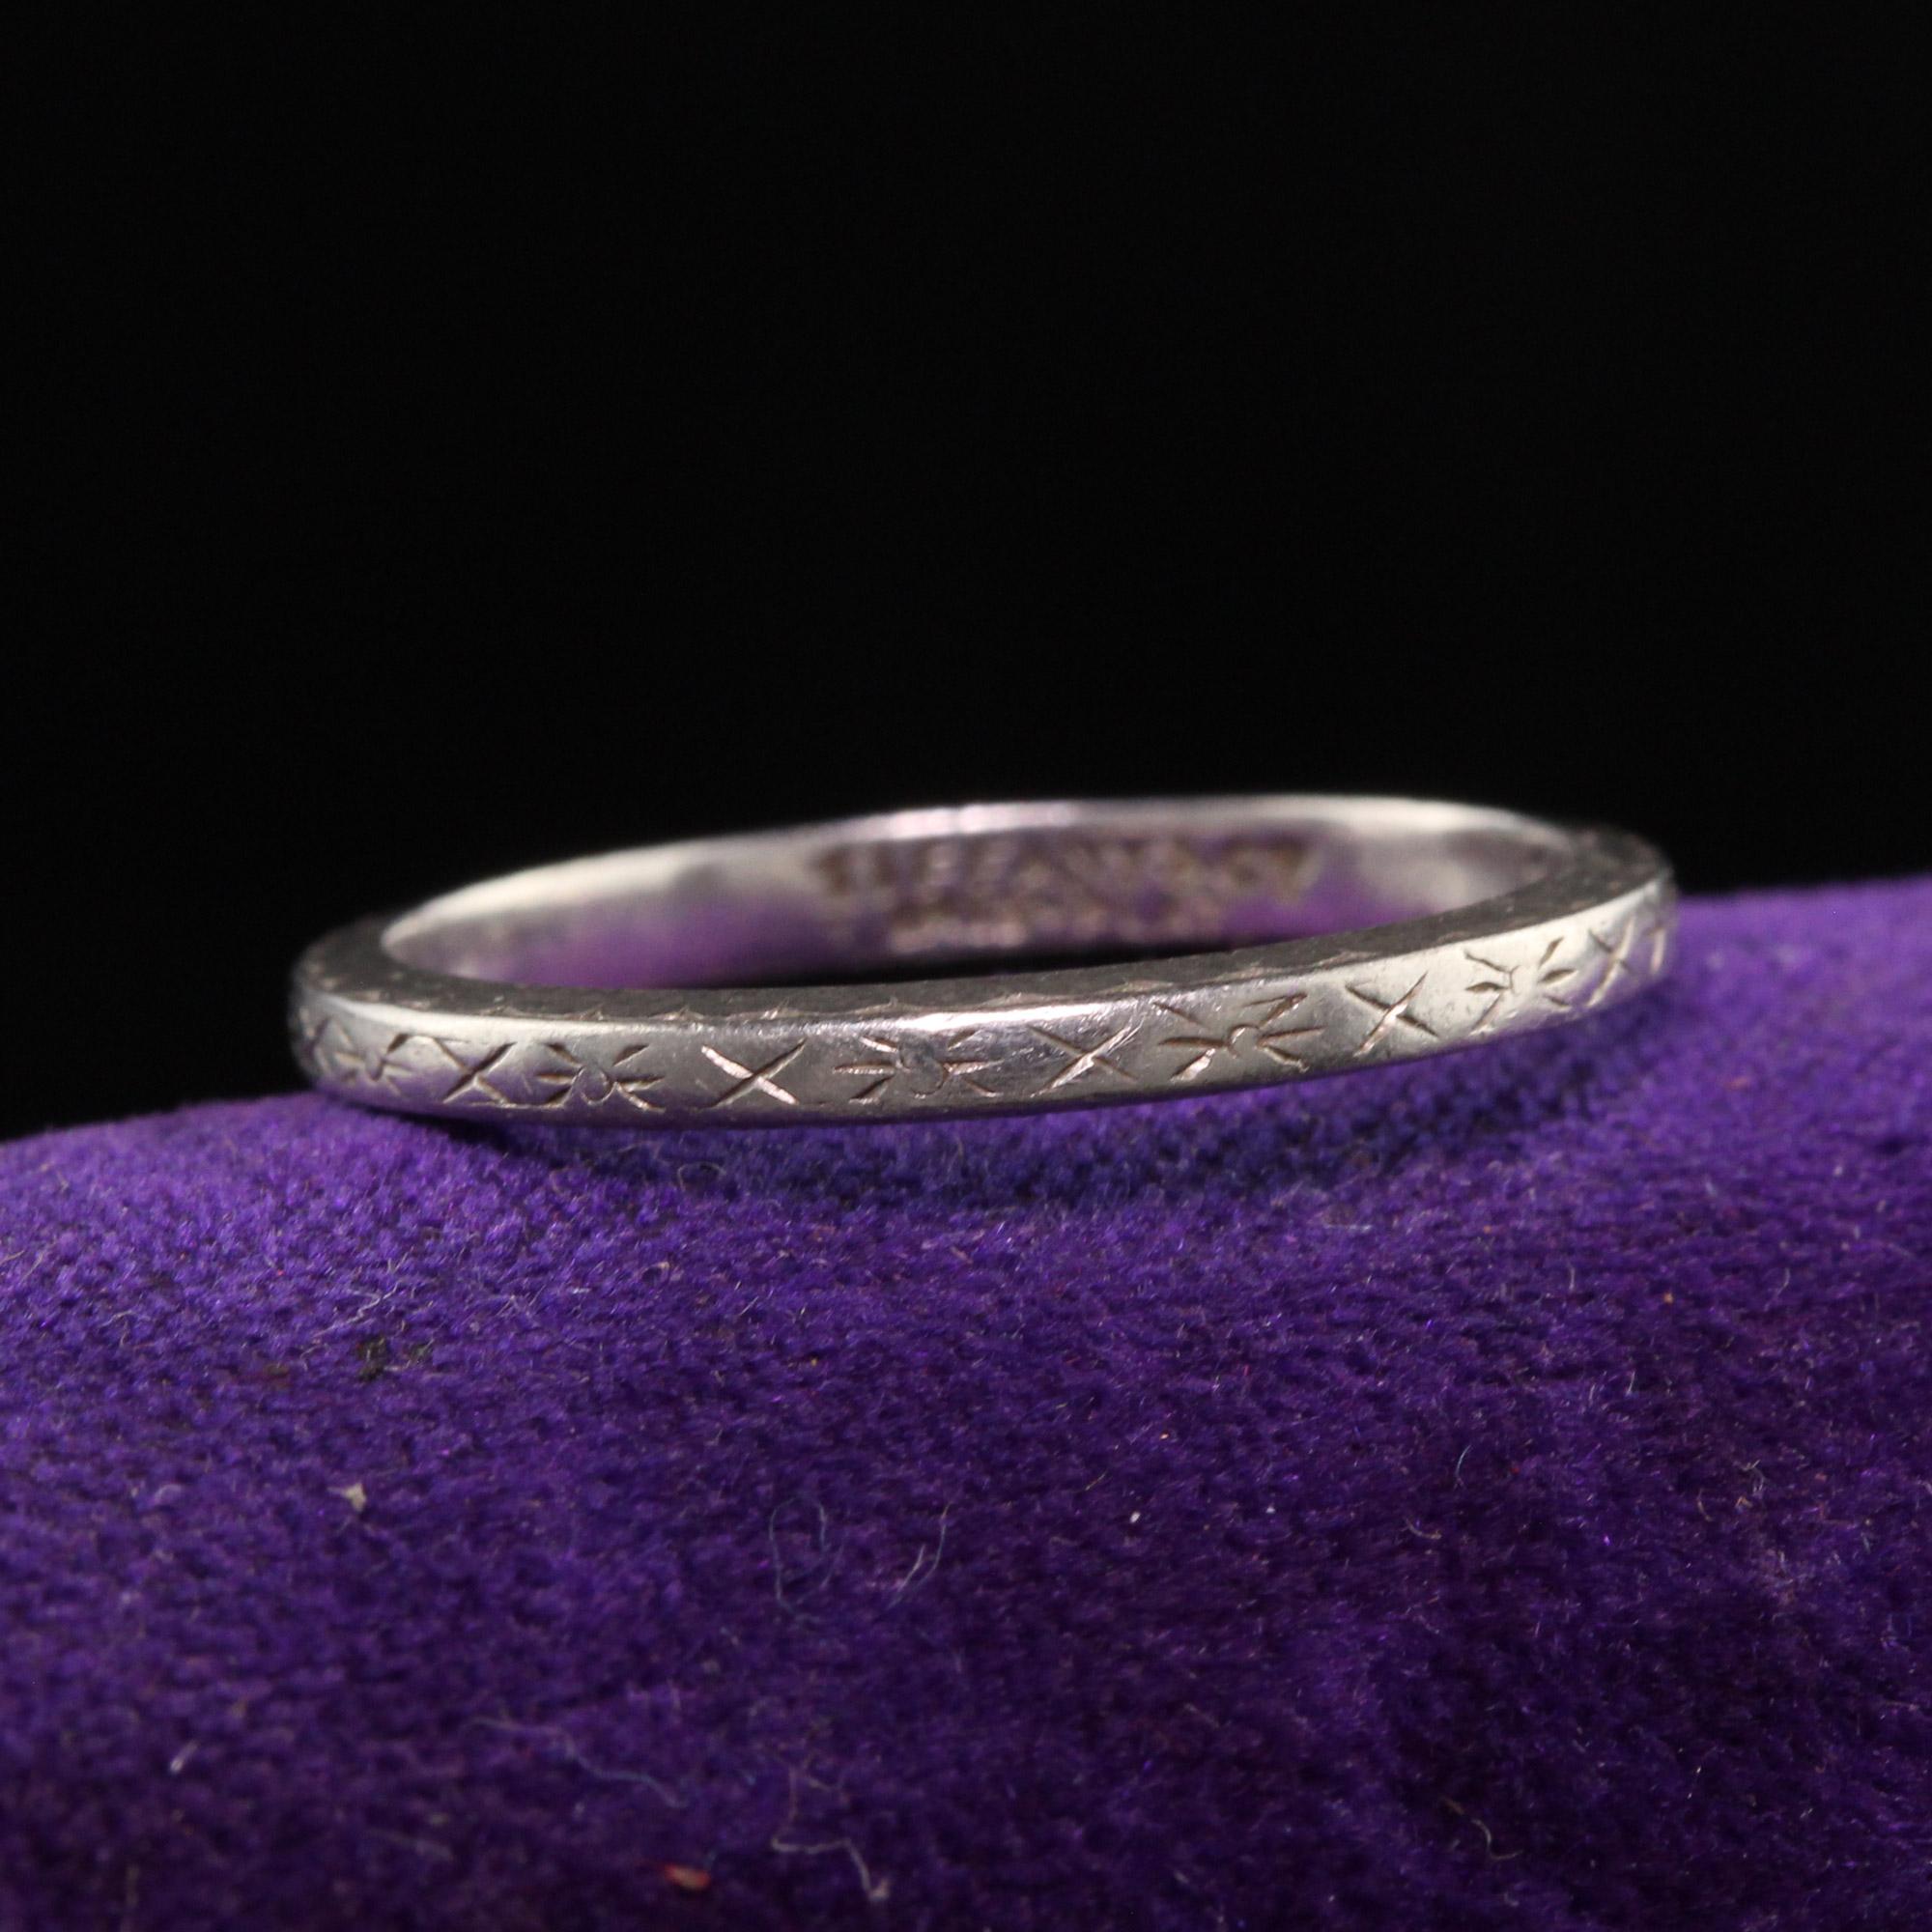 Beautiful Antique Art Deco Tiffany and Co Platinum Engraved Wedding Band - Size 5. This classic wedding band has engravings on the top and is engraved 